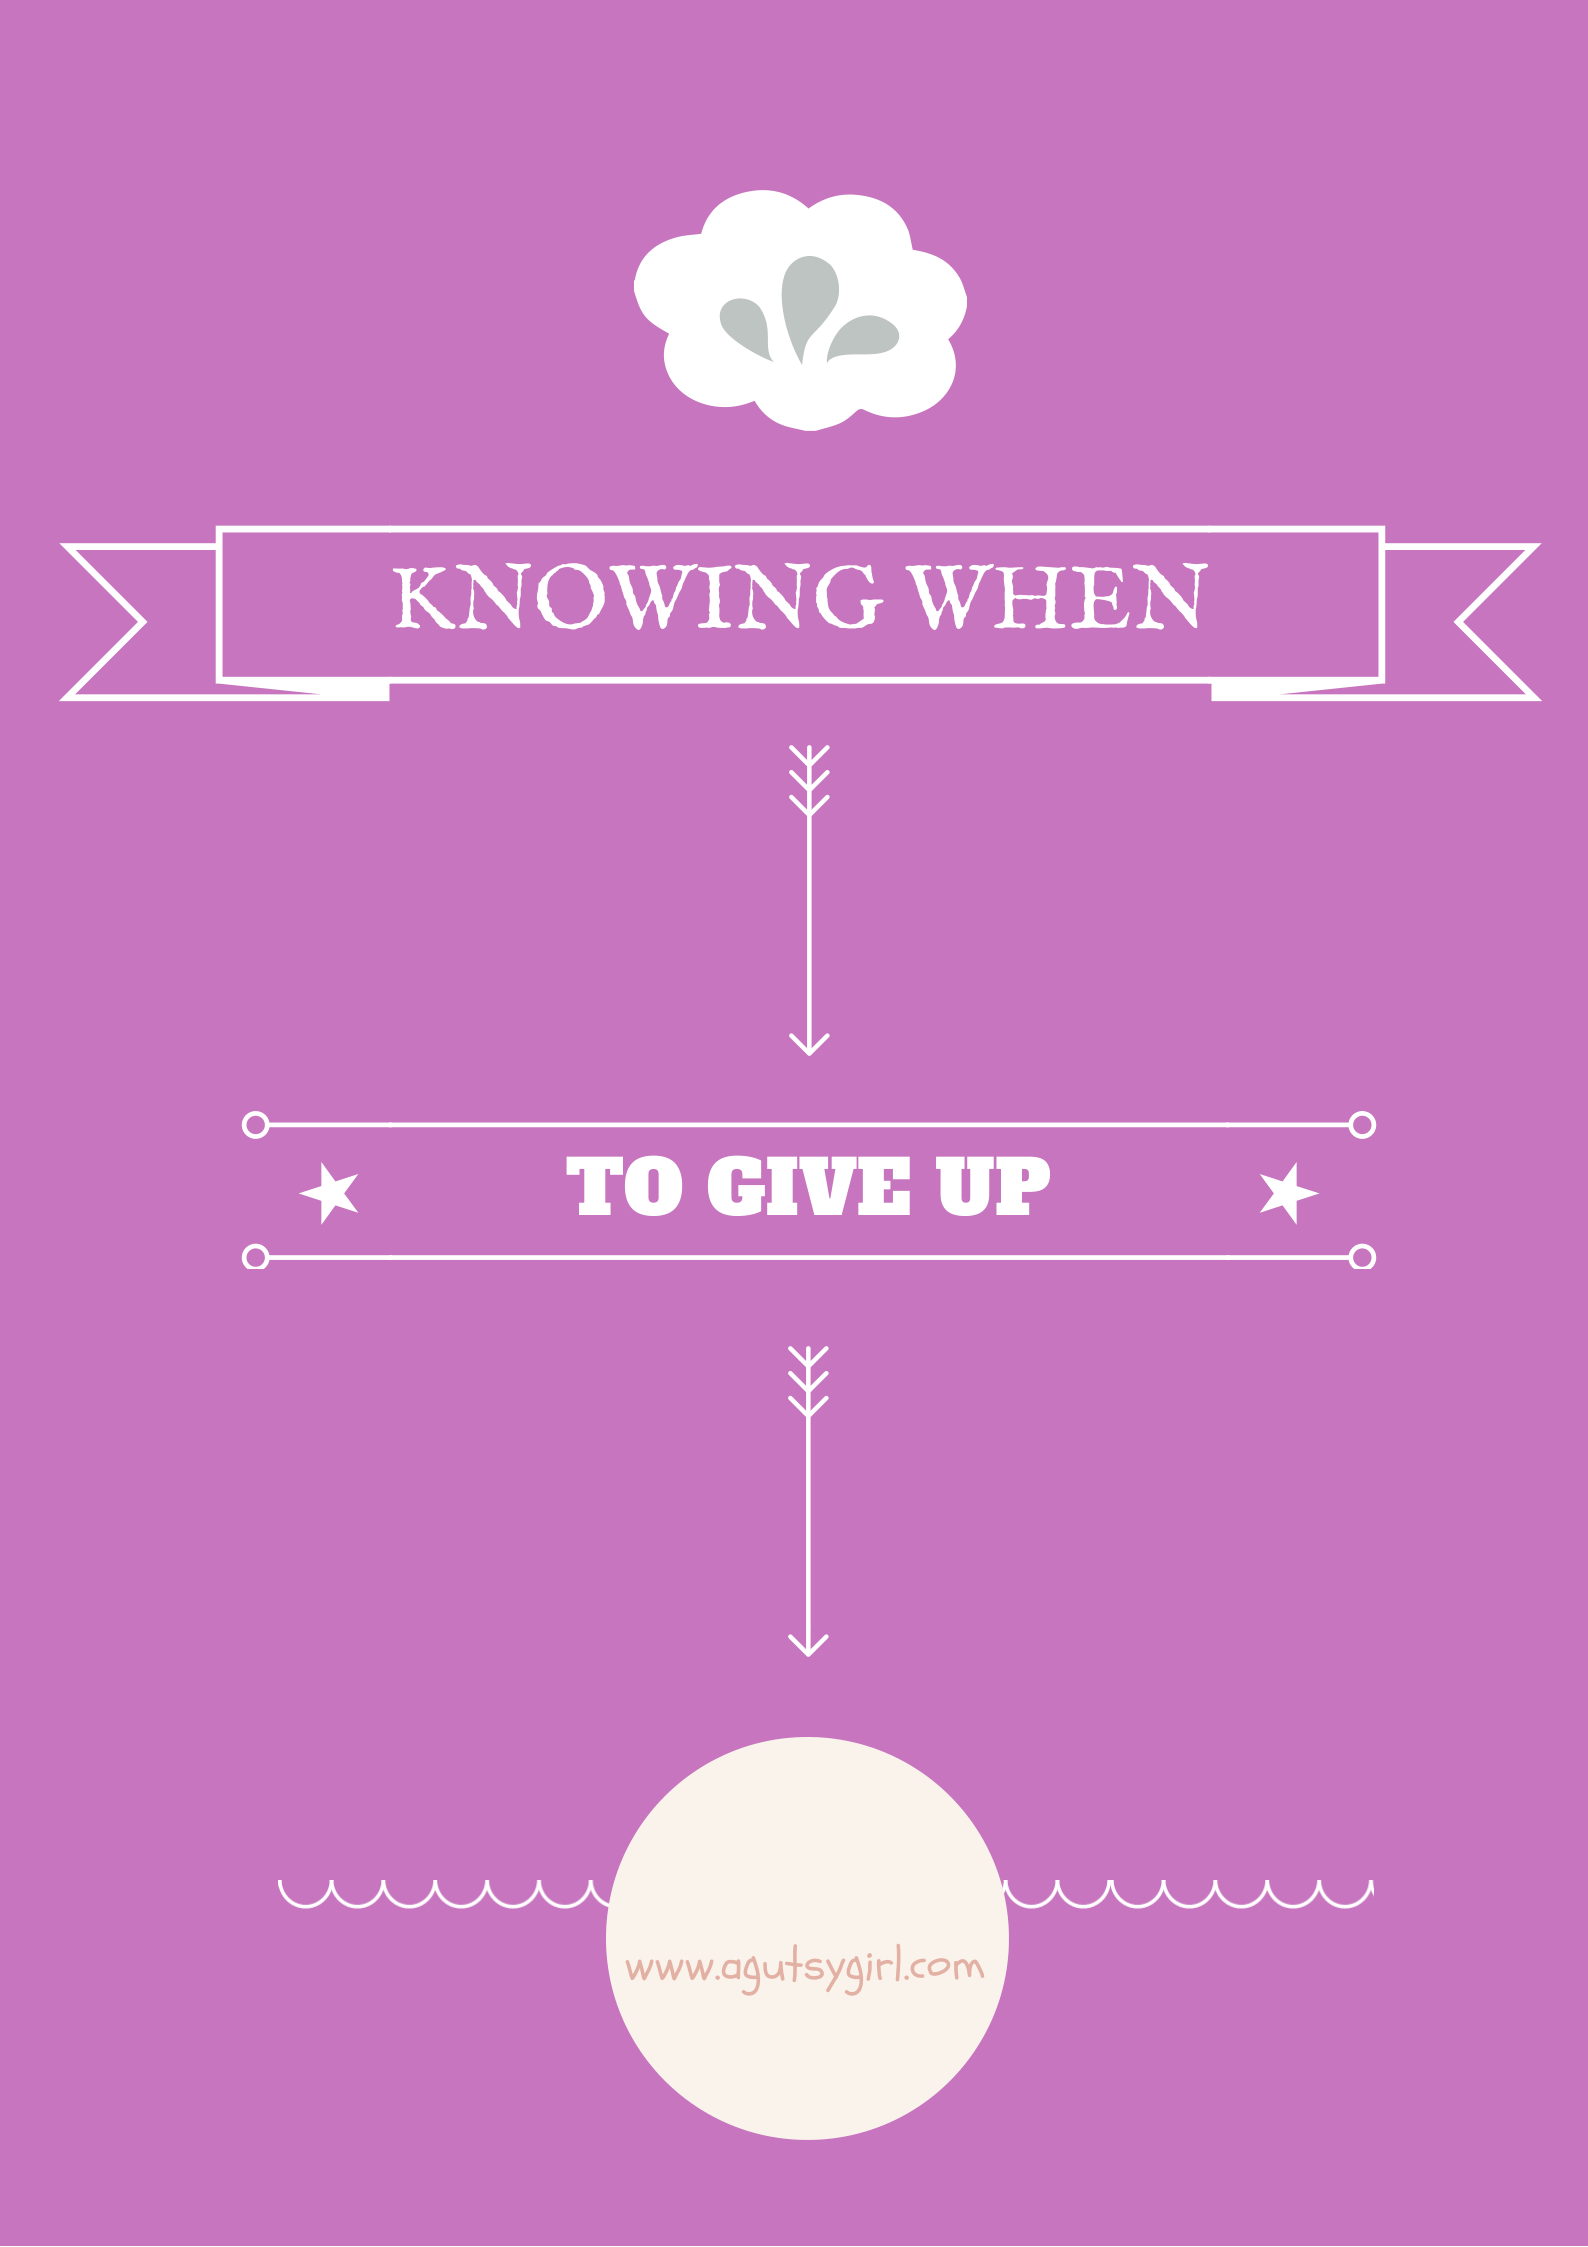 Knowing When to Give Up via www.agutsygirl.com #running #workouts #ibs #ibd